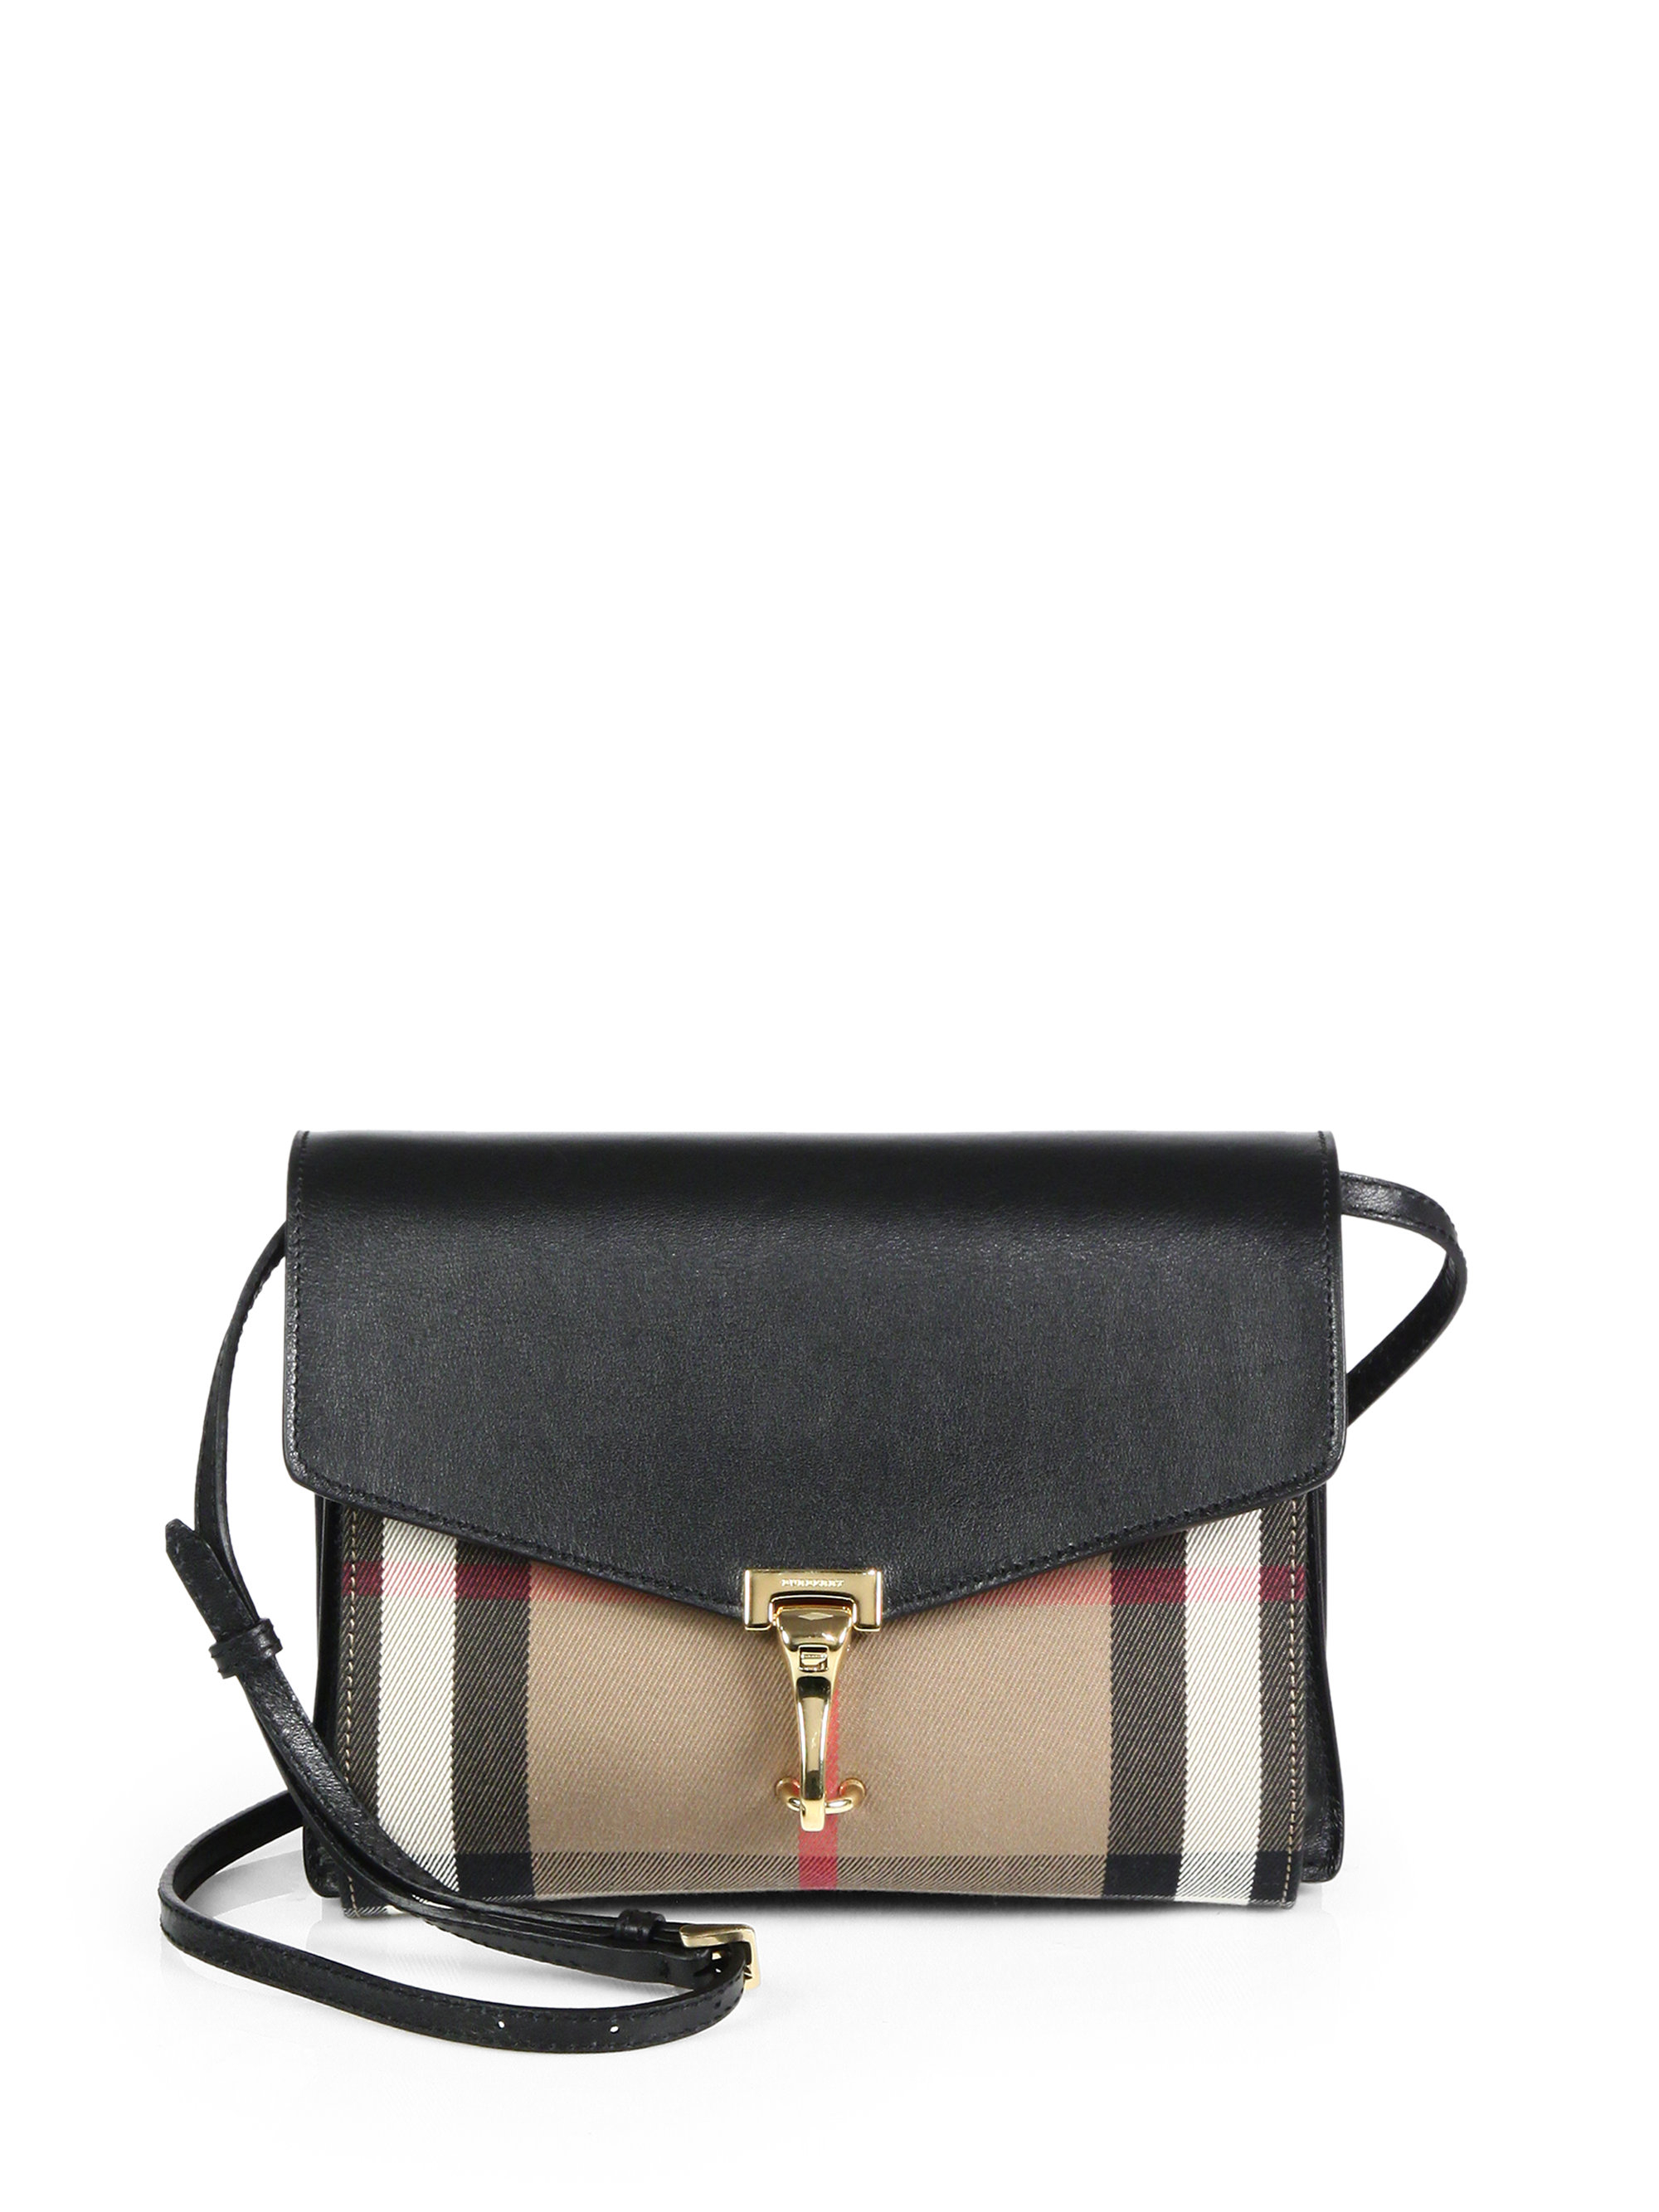 Burberry Macken Small House Check & Leather Crossbody Bag in Black | Lyst